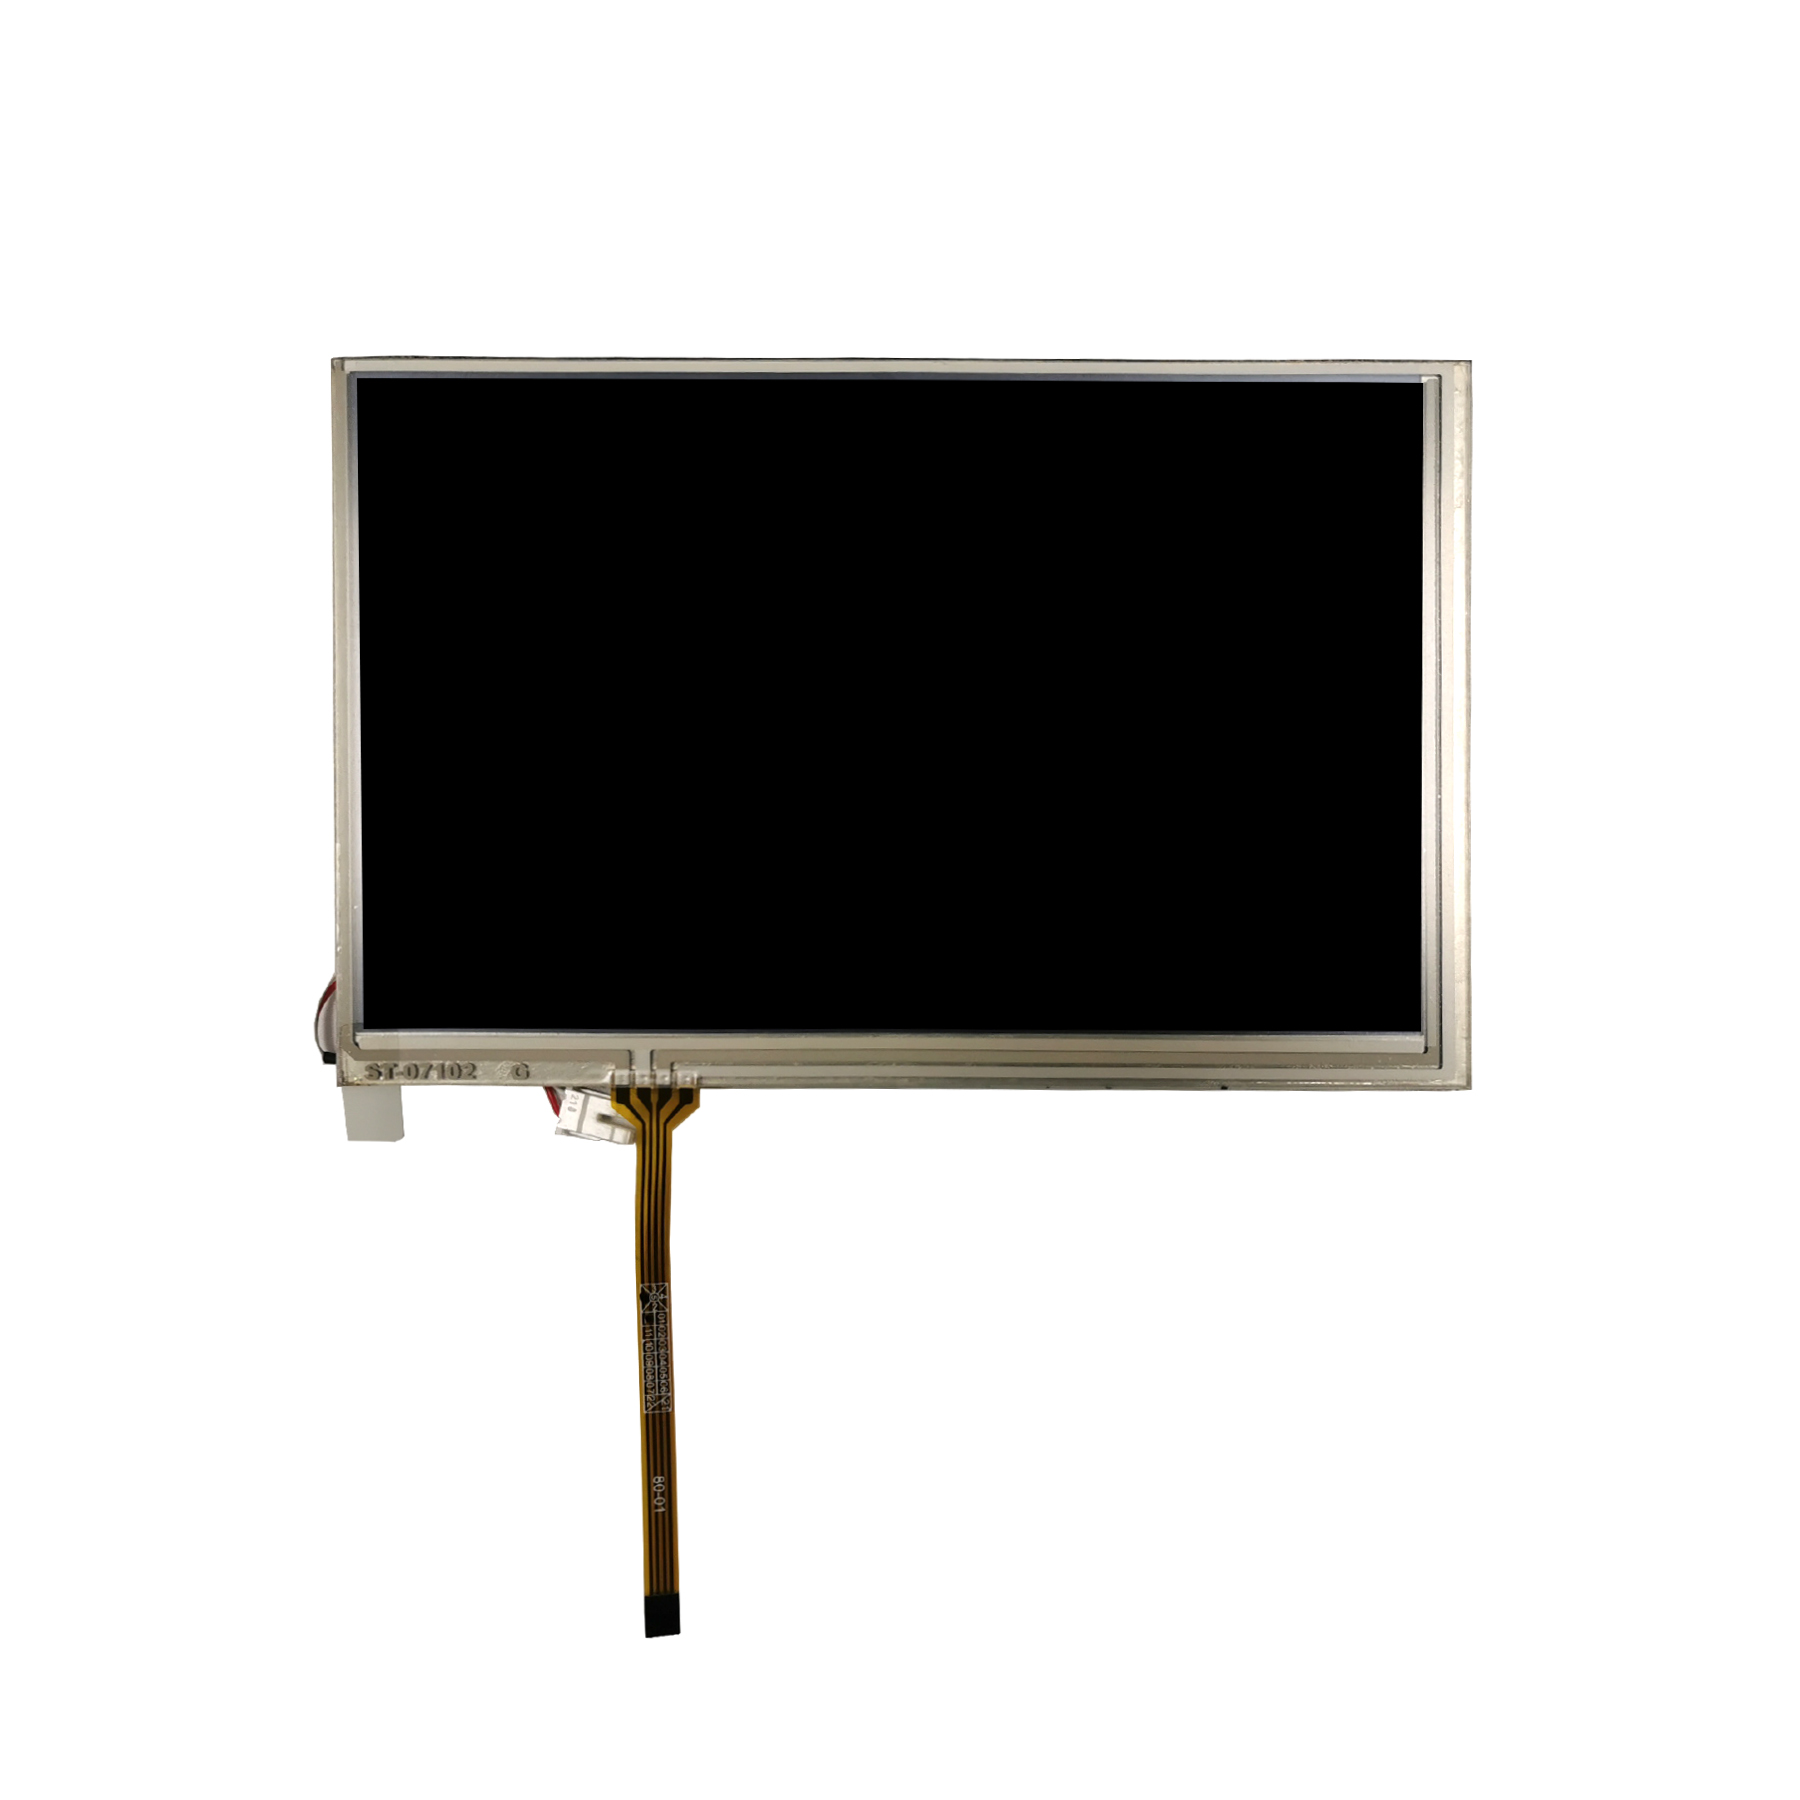 7" Replace Innolux LW700AT9309 LCD Display (800x480)